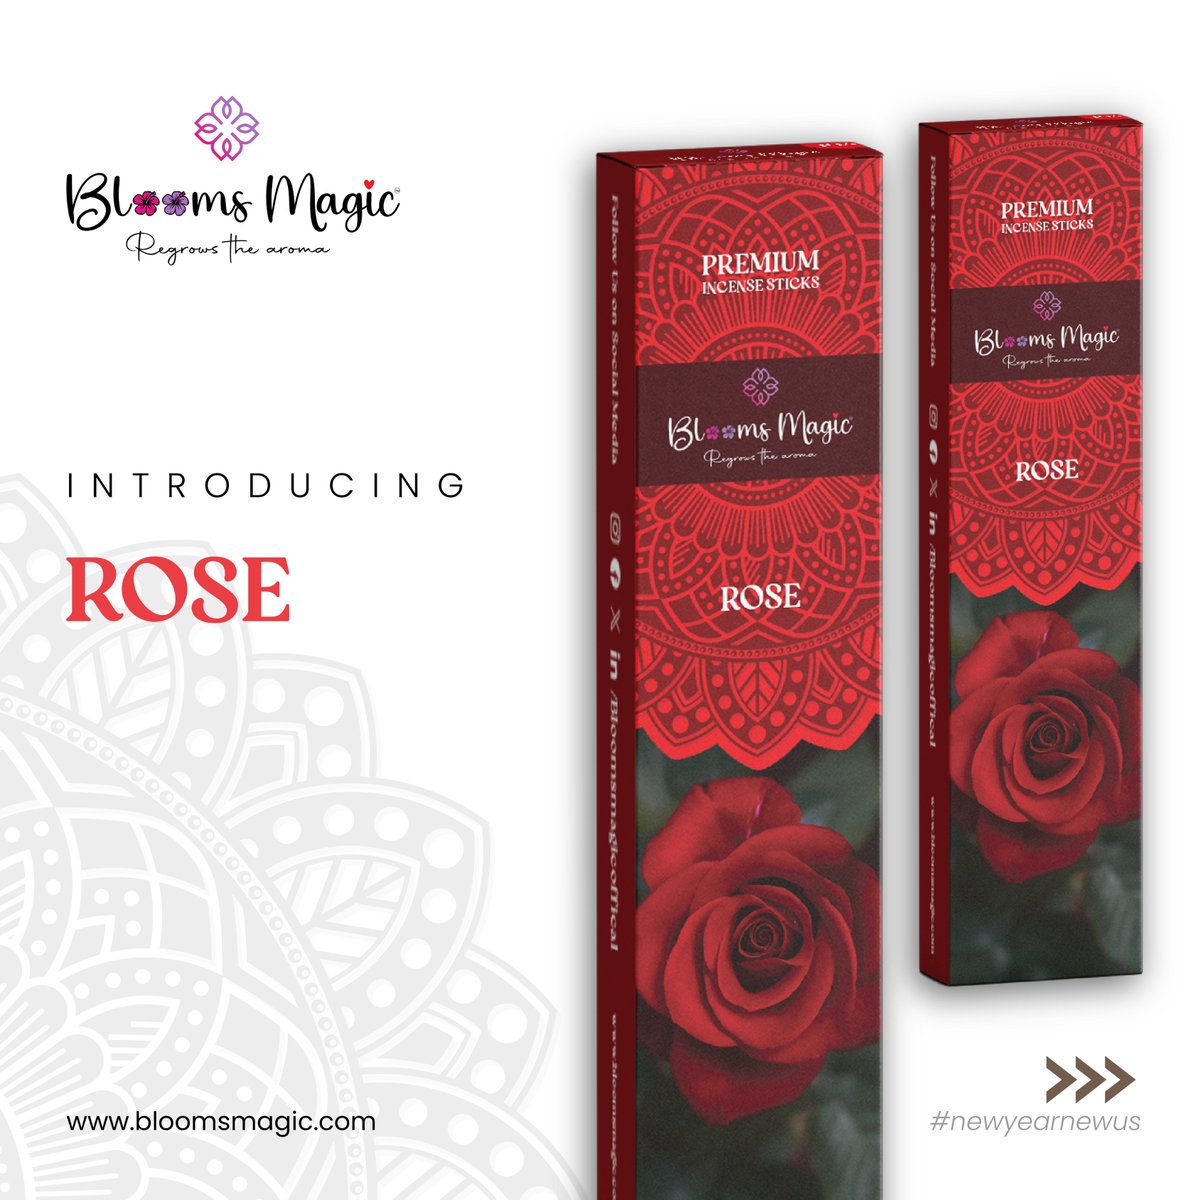 'Indulge in the delicate allure of rose incense sticks – a fragrant journey to serenity, where every breath unfolds a petal of tranquility.'
#DivineScents #AgarbattiLove #SoulfulSpaces
#PrayerPerfume #MeditationEssentials
#FragrantDevotion #IncenseJourney